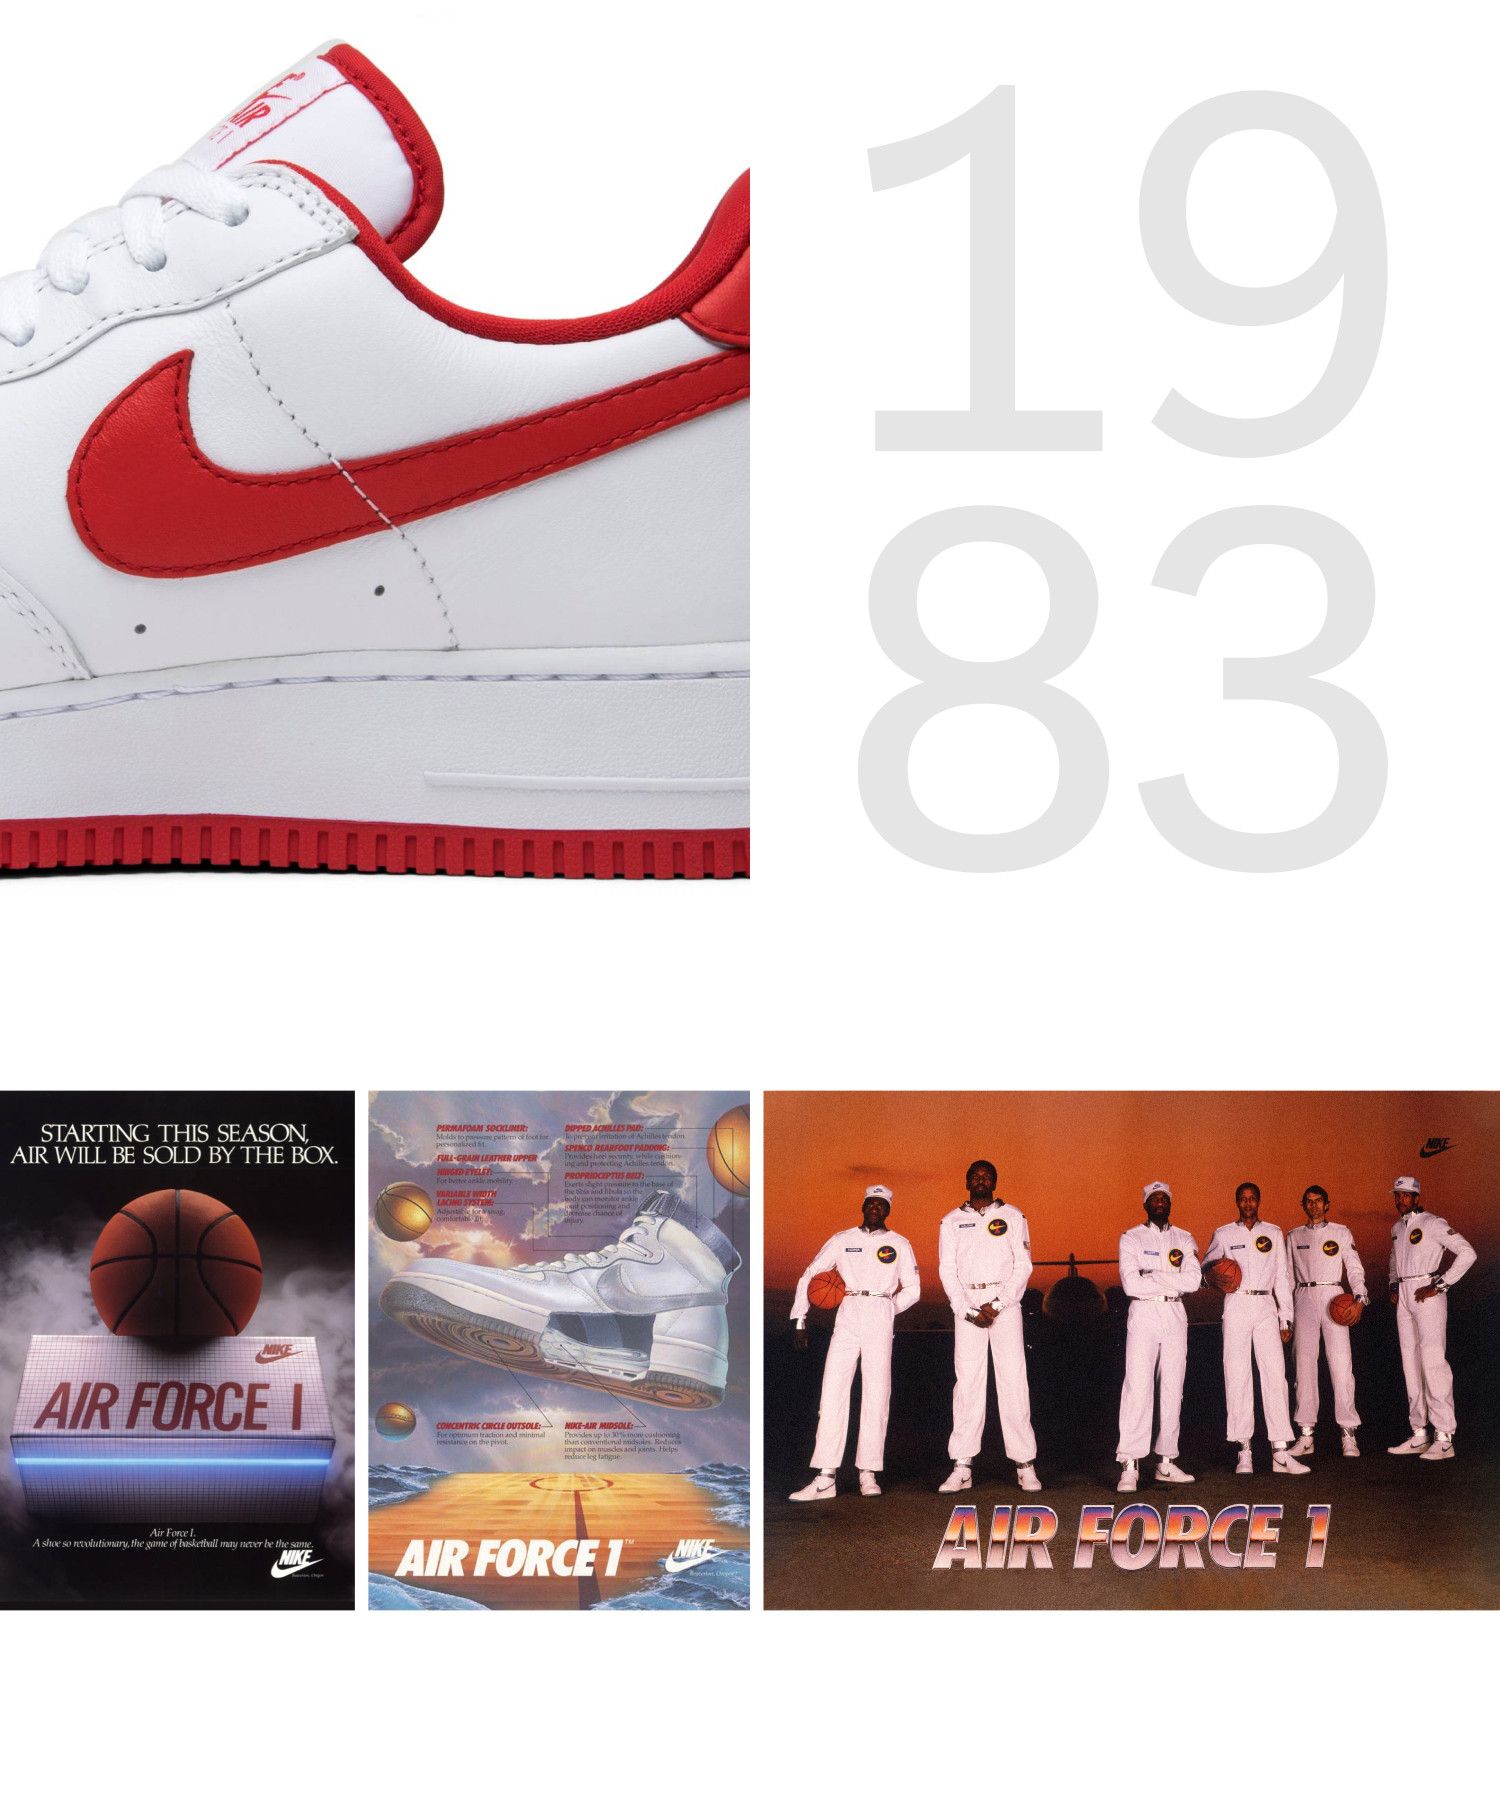 the history of nike air force 1